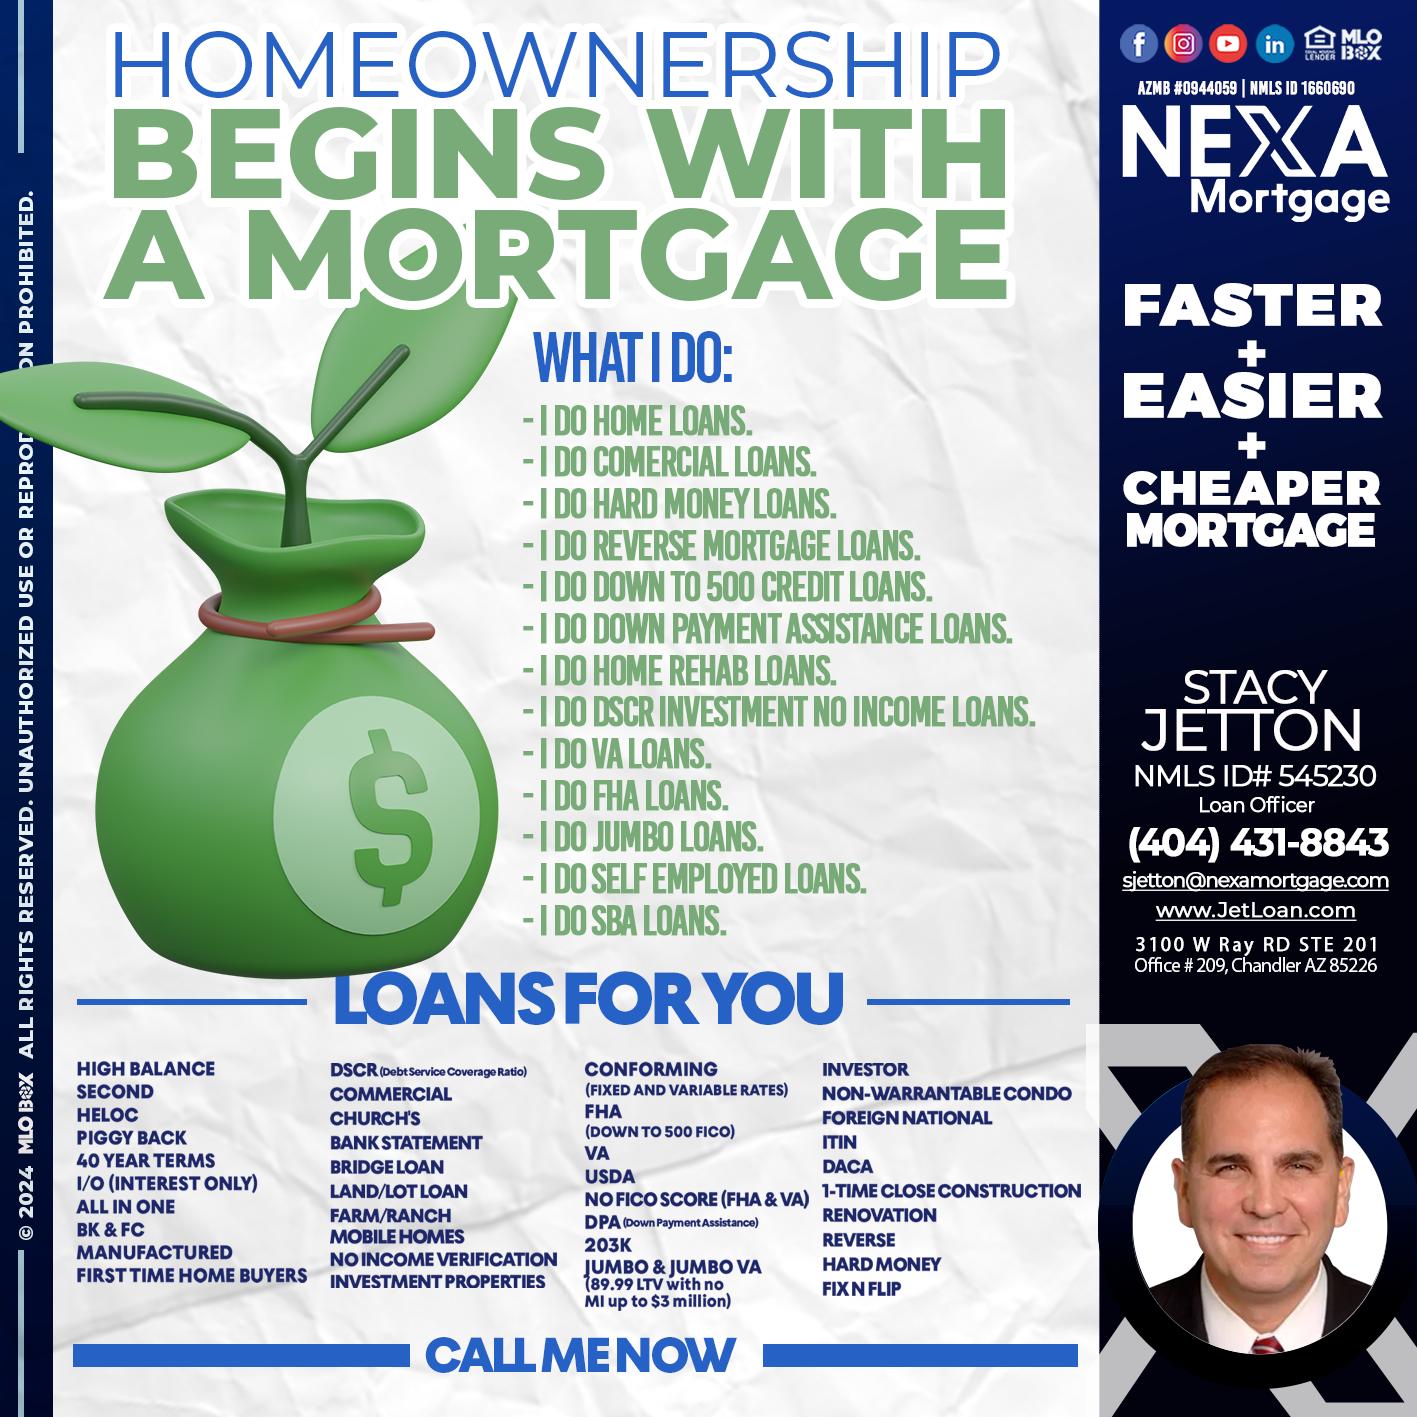 HOME OWNERSHIP - Stacy Jetton -Sr. Mortgage Broker